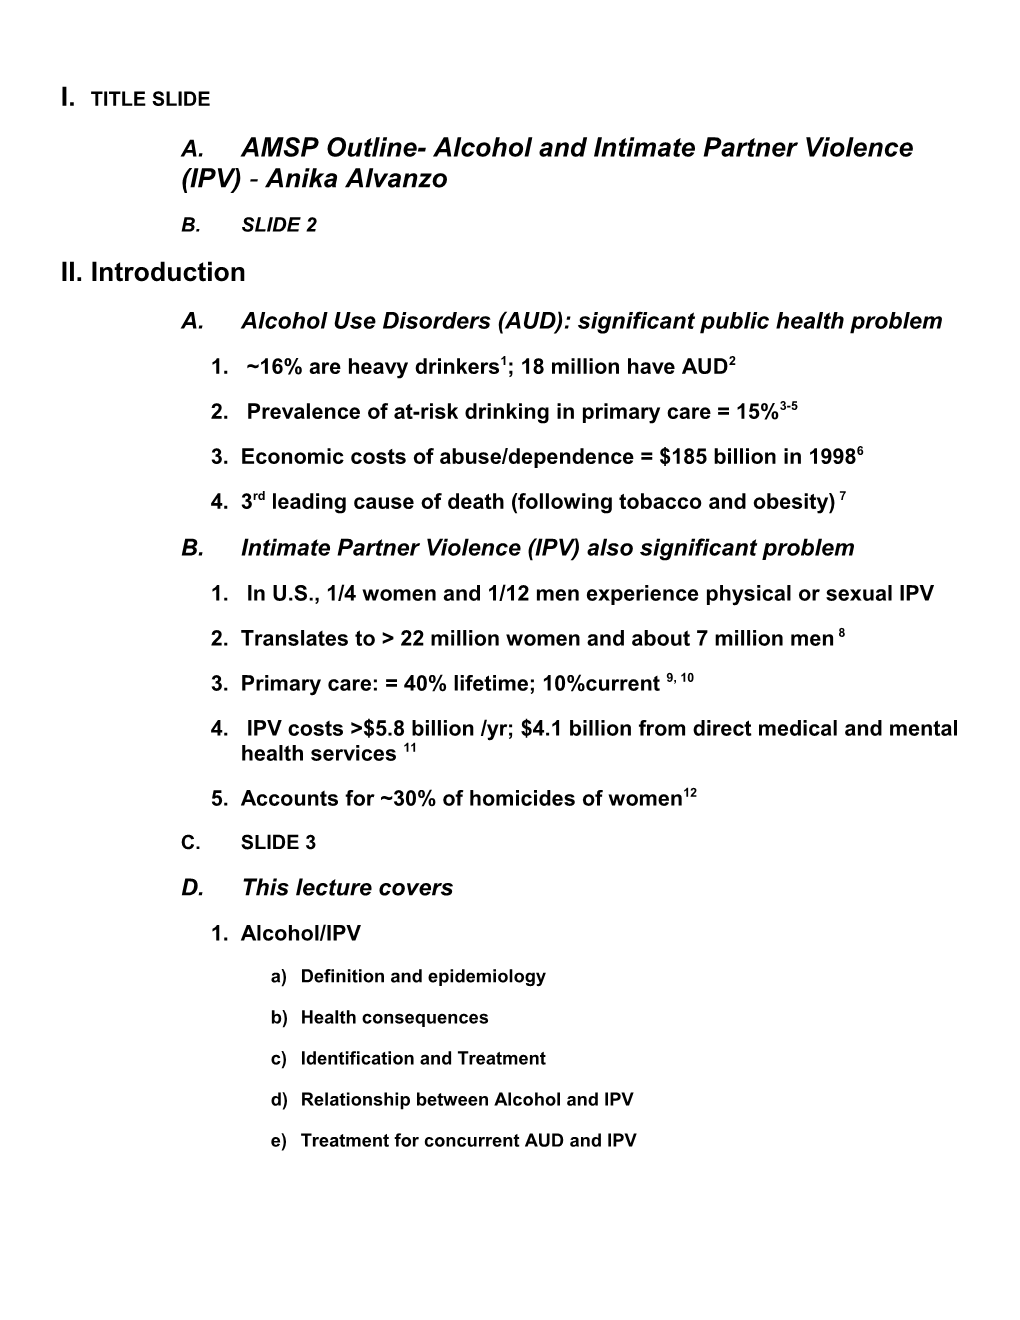 AMSP Outline- Alcohol and Intimate Partner Violence (IPV)